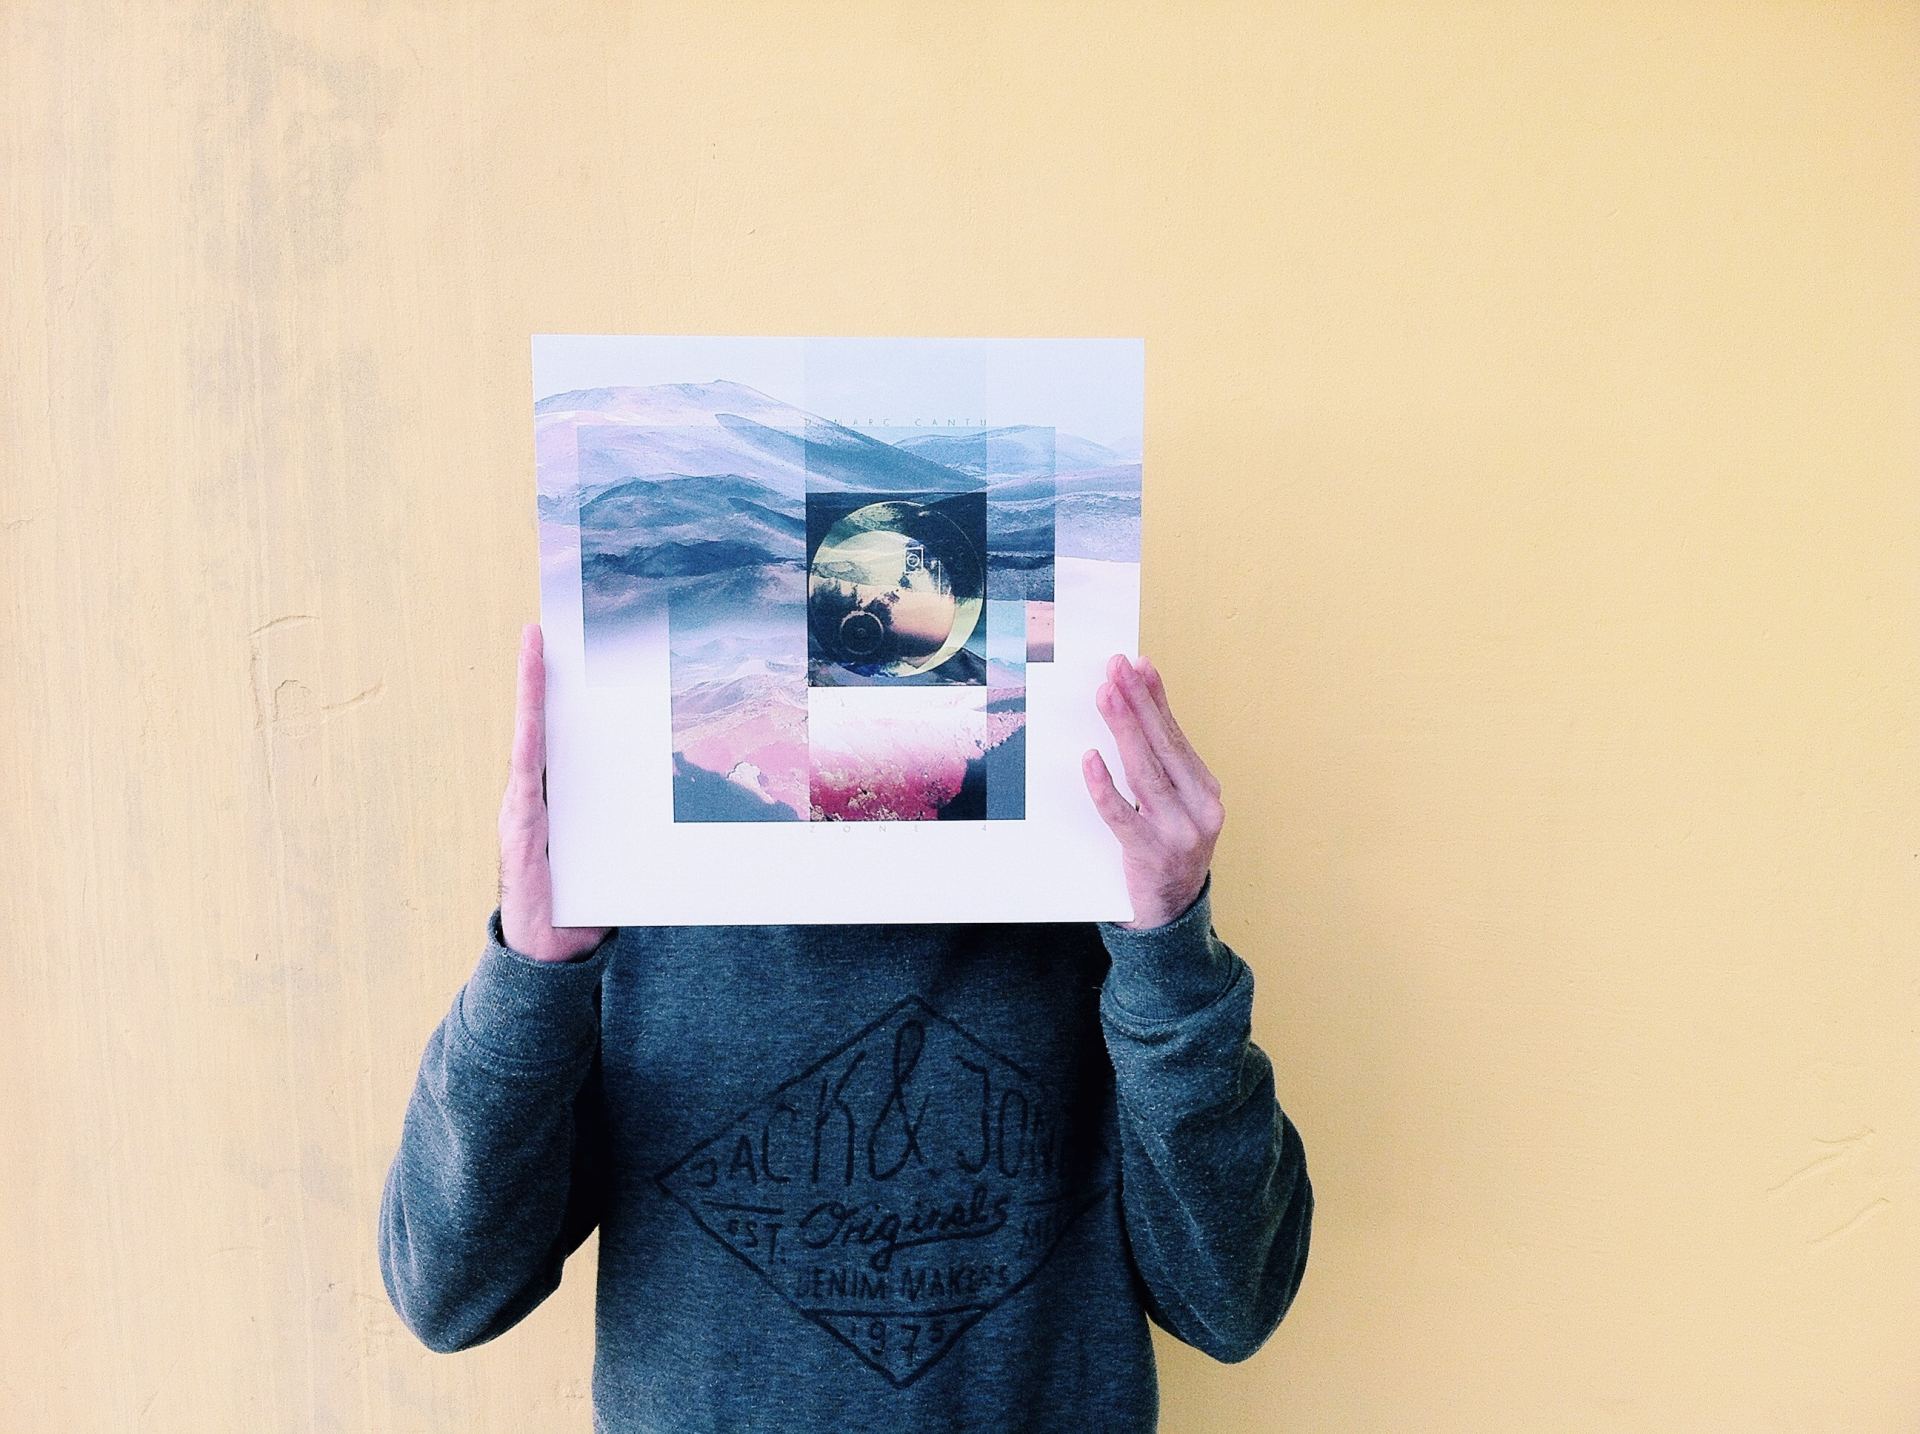 Man holding LP sized artwork in front of his face.